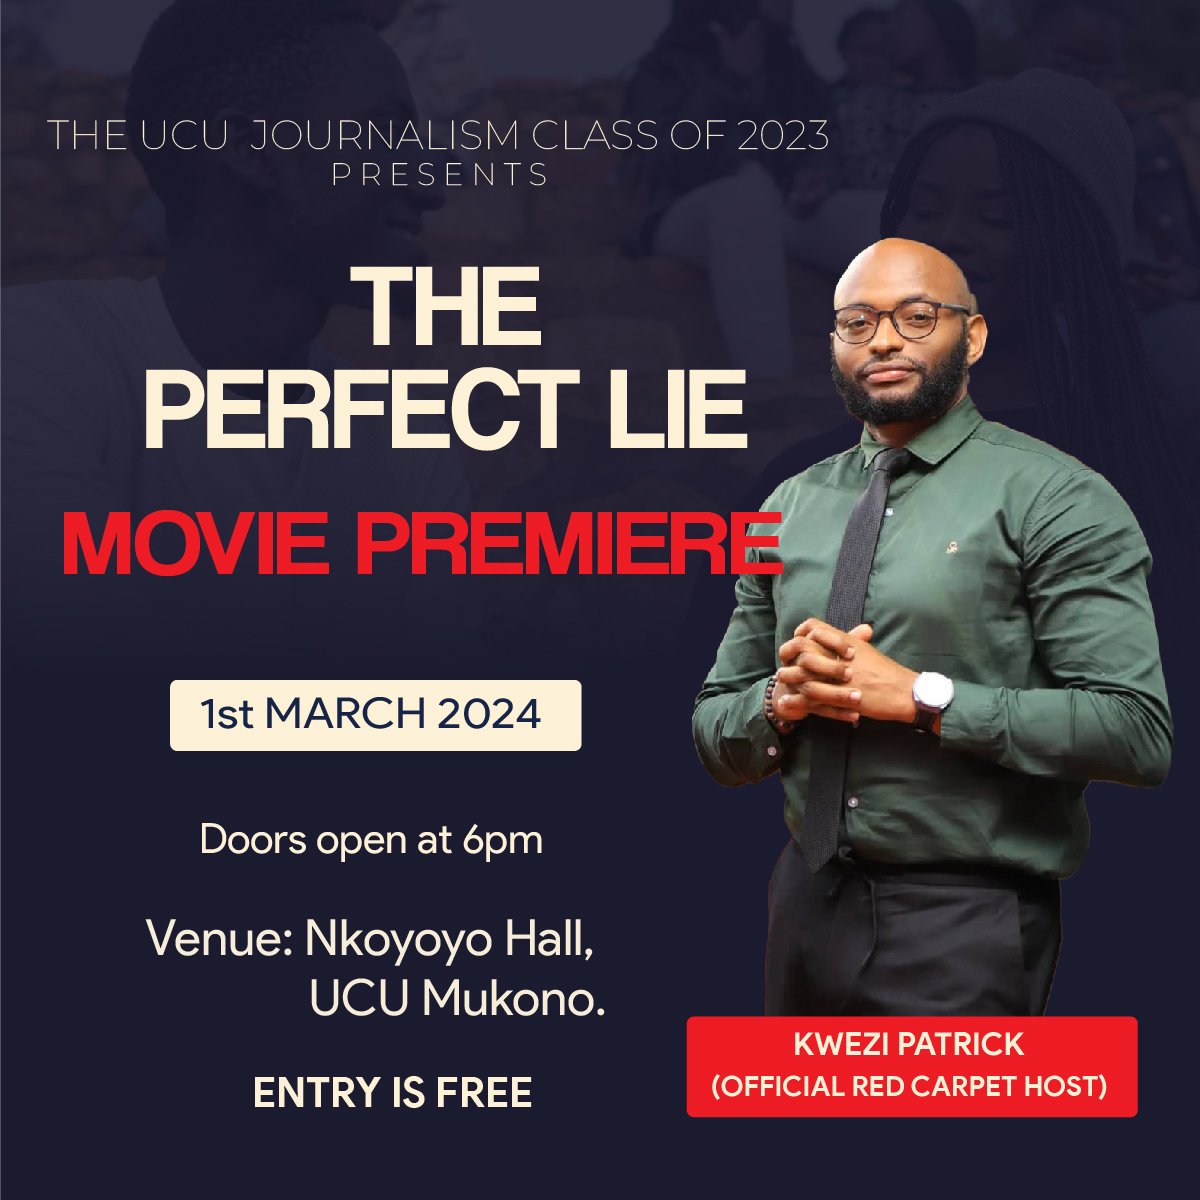 Introducing your official Red carpet host @kwezirico . It's going to be an unforgettable night at the premiere of #ThePerfectLie.